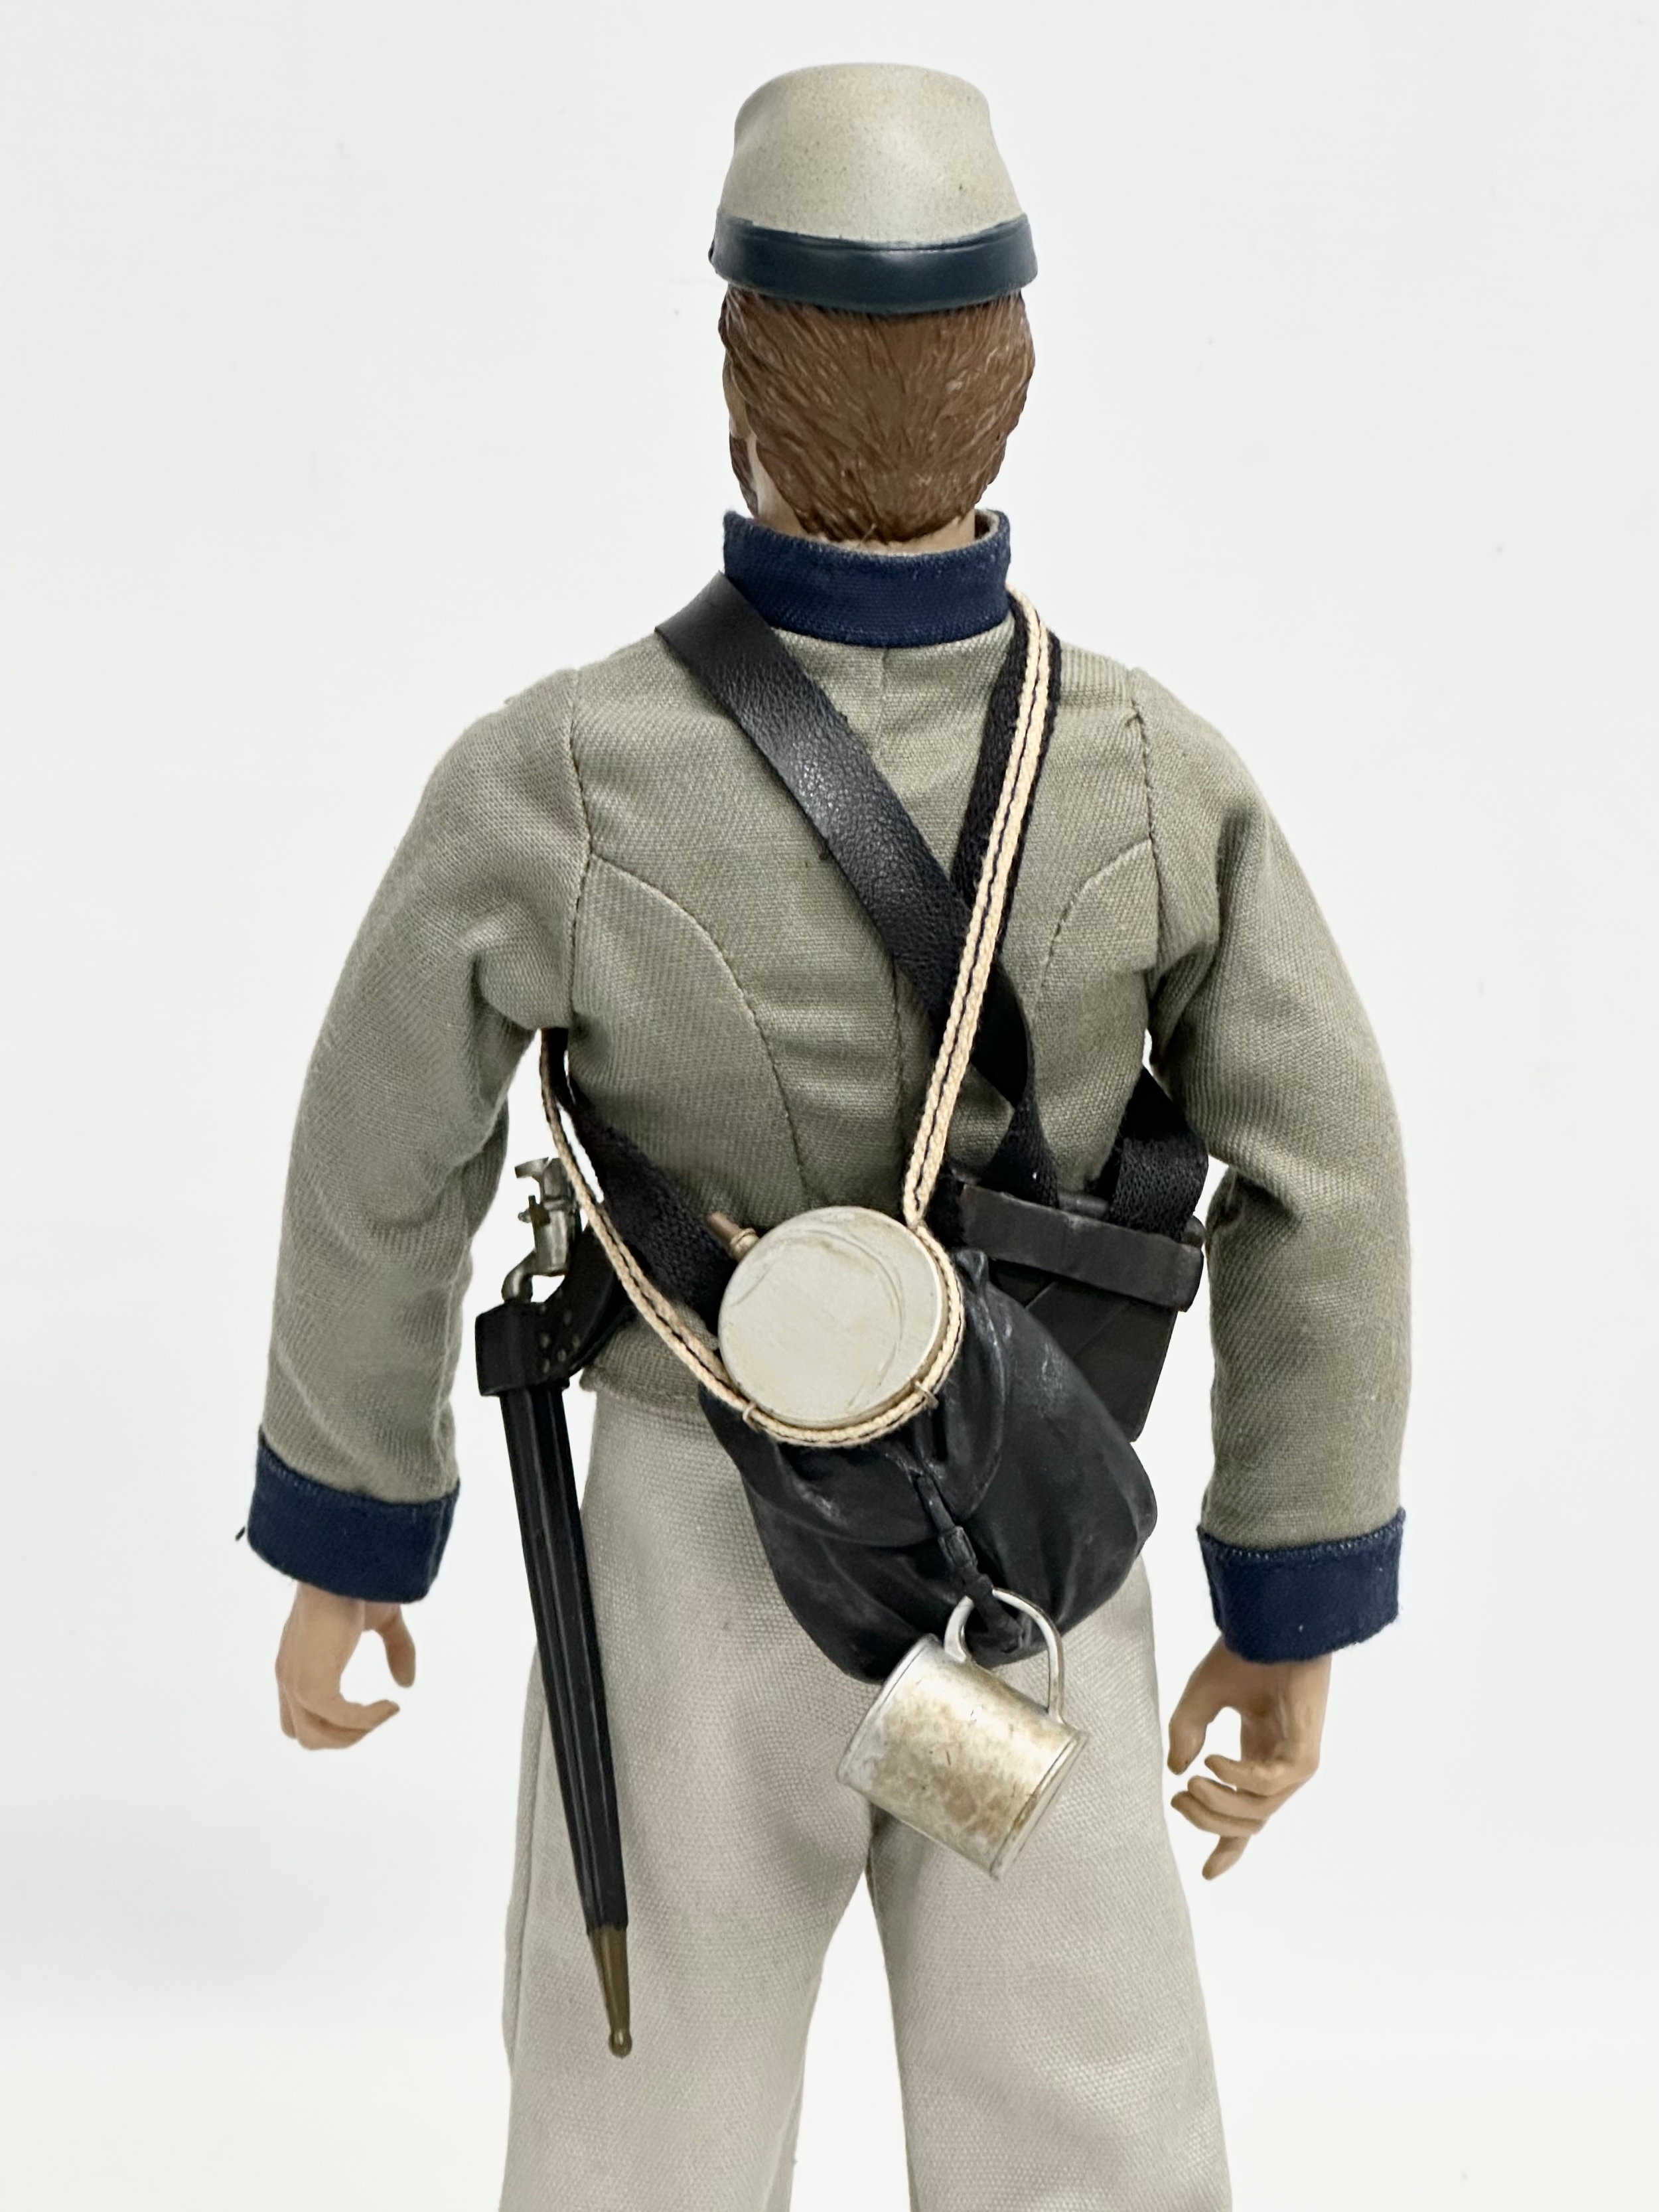 A Sideshow Toys American Civil War Brotherhood of Arms Confederate Infantry Action Figure. 32.5cm - Image 5 of 5